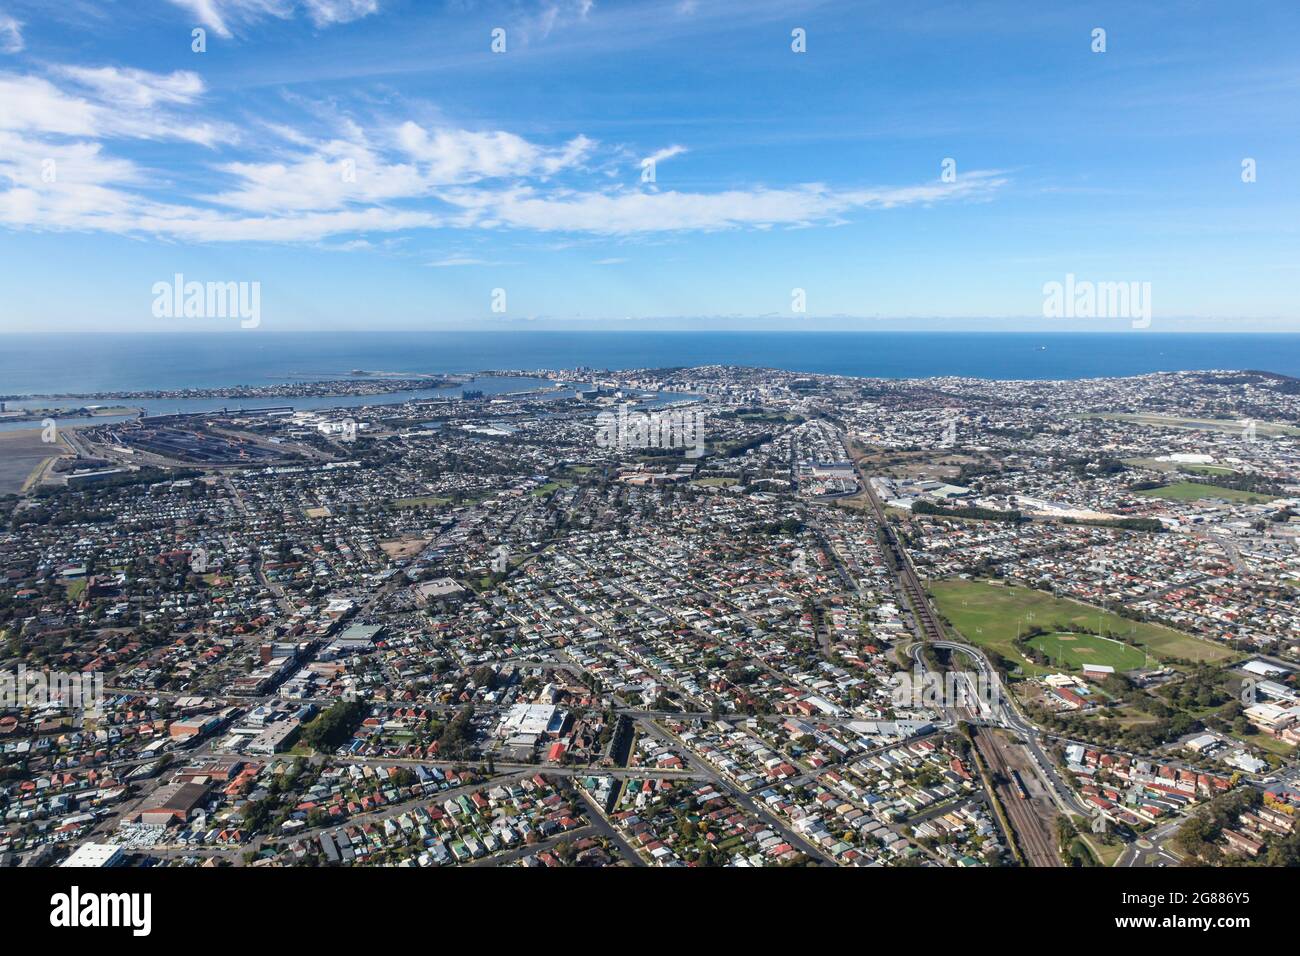 Aerial view of Newcastle showing many of the inner city surburbs through to the harbour and beaches area. Newcastle is a major city in NSW Stock Photo